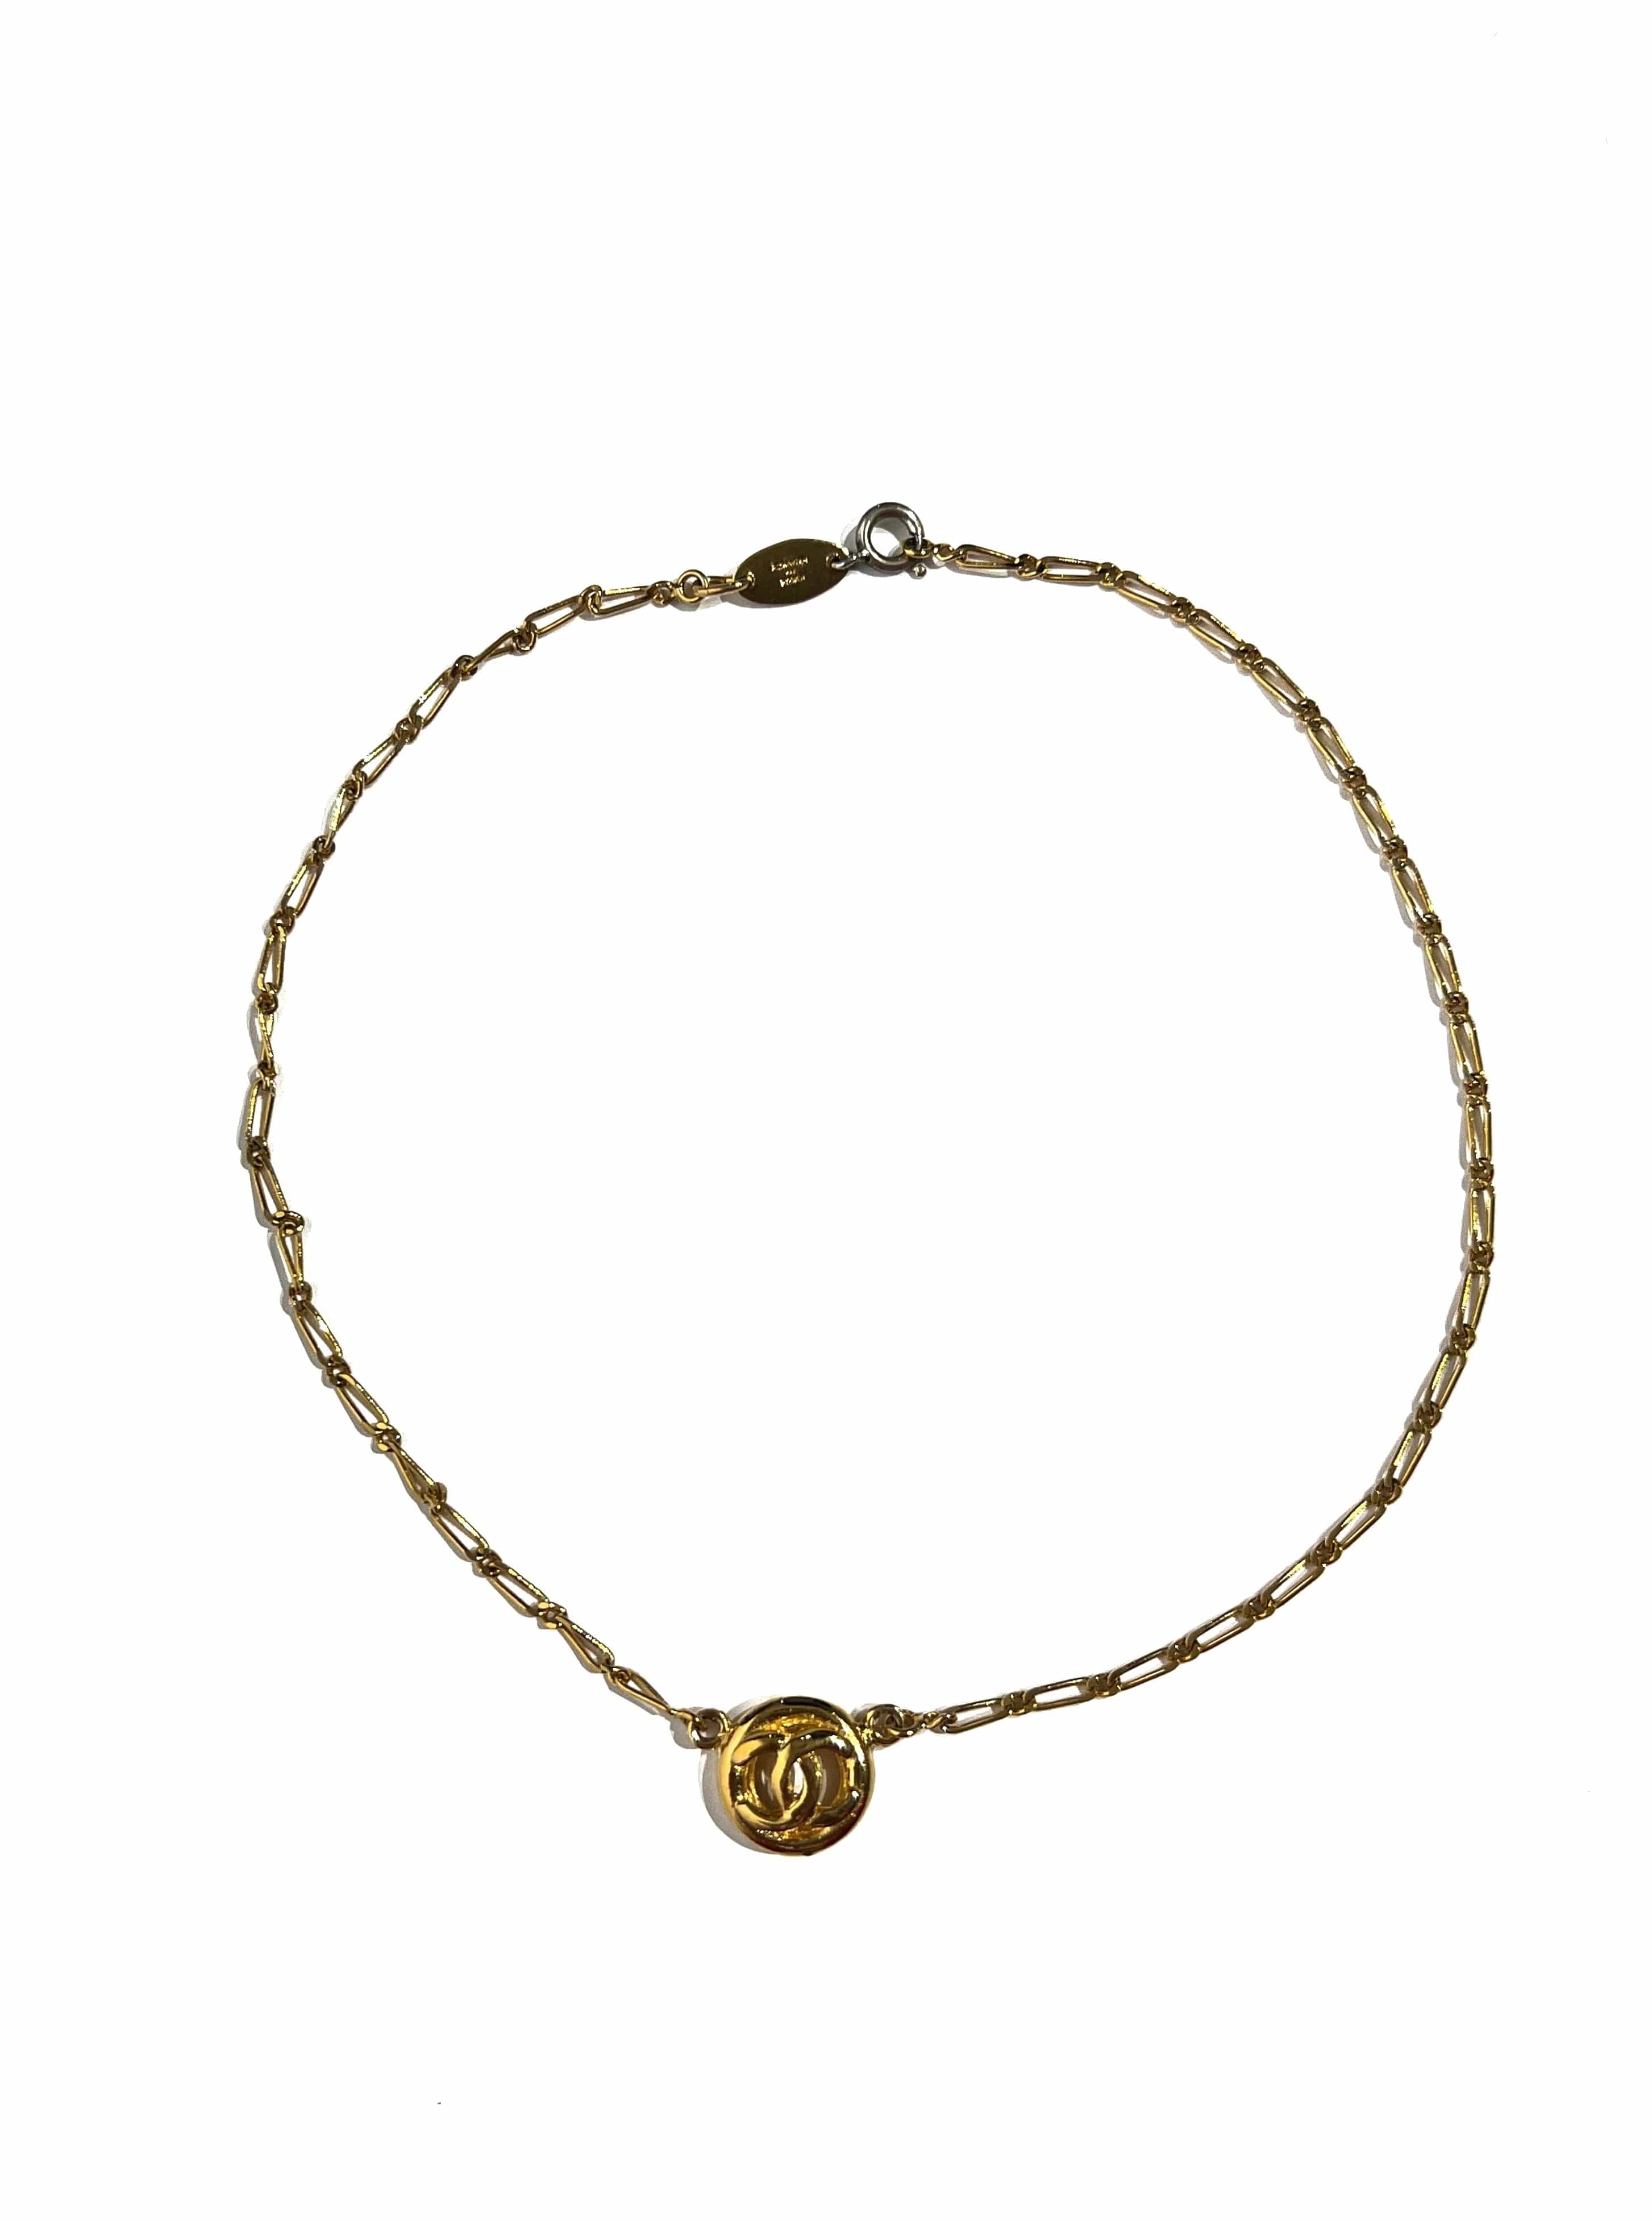 Chanel chanel Vintage CC round logo necklace with gold chain - AWL3387